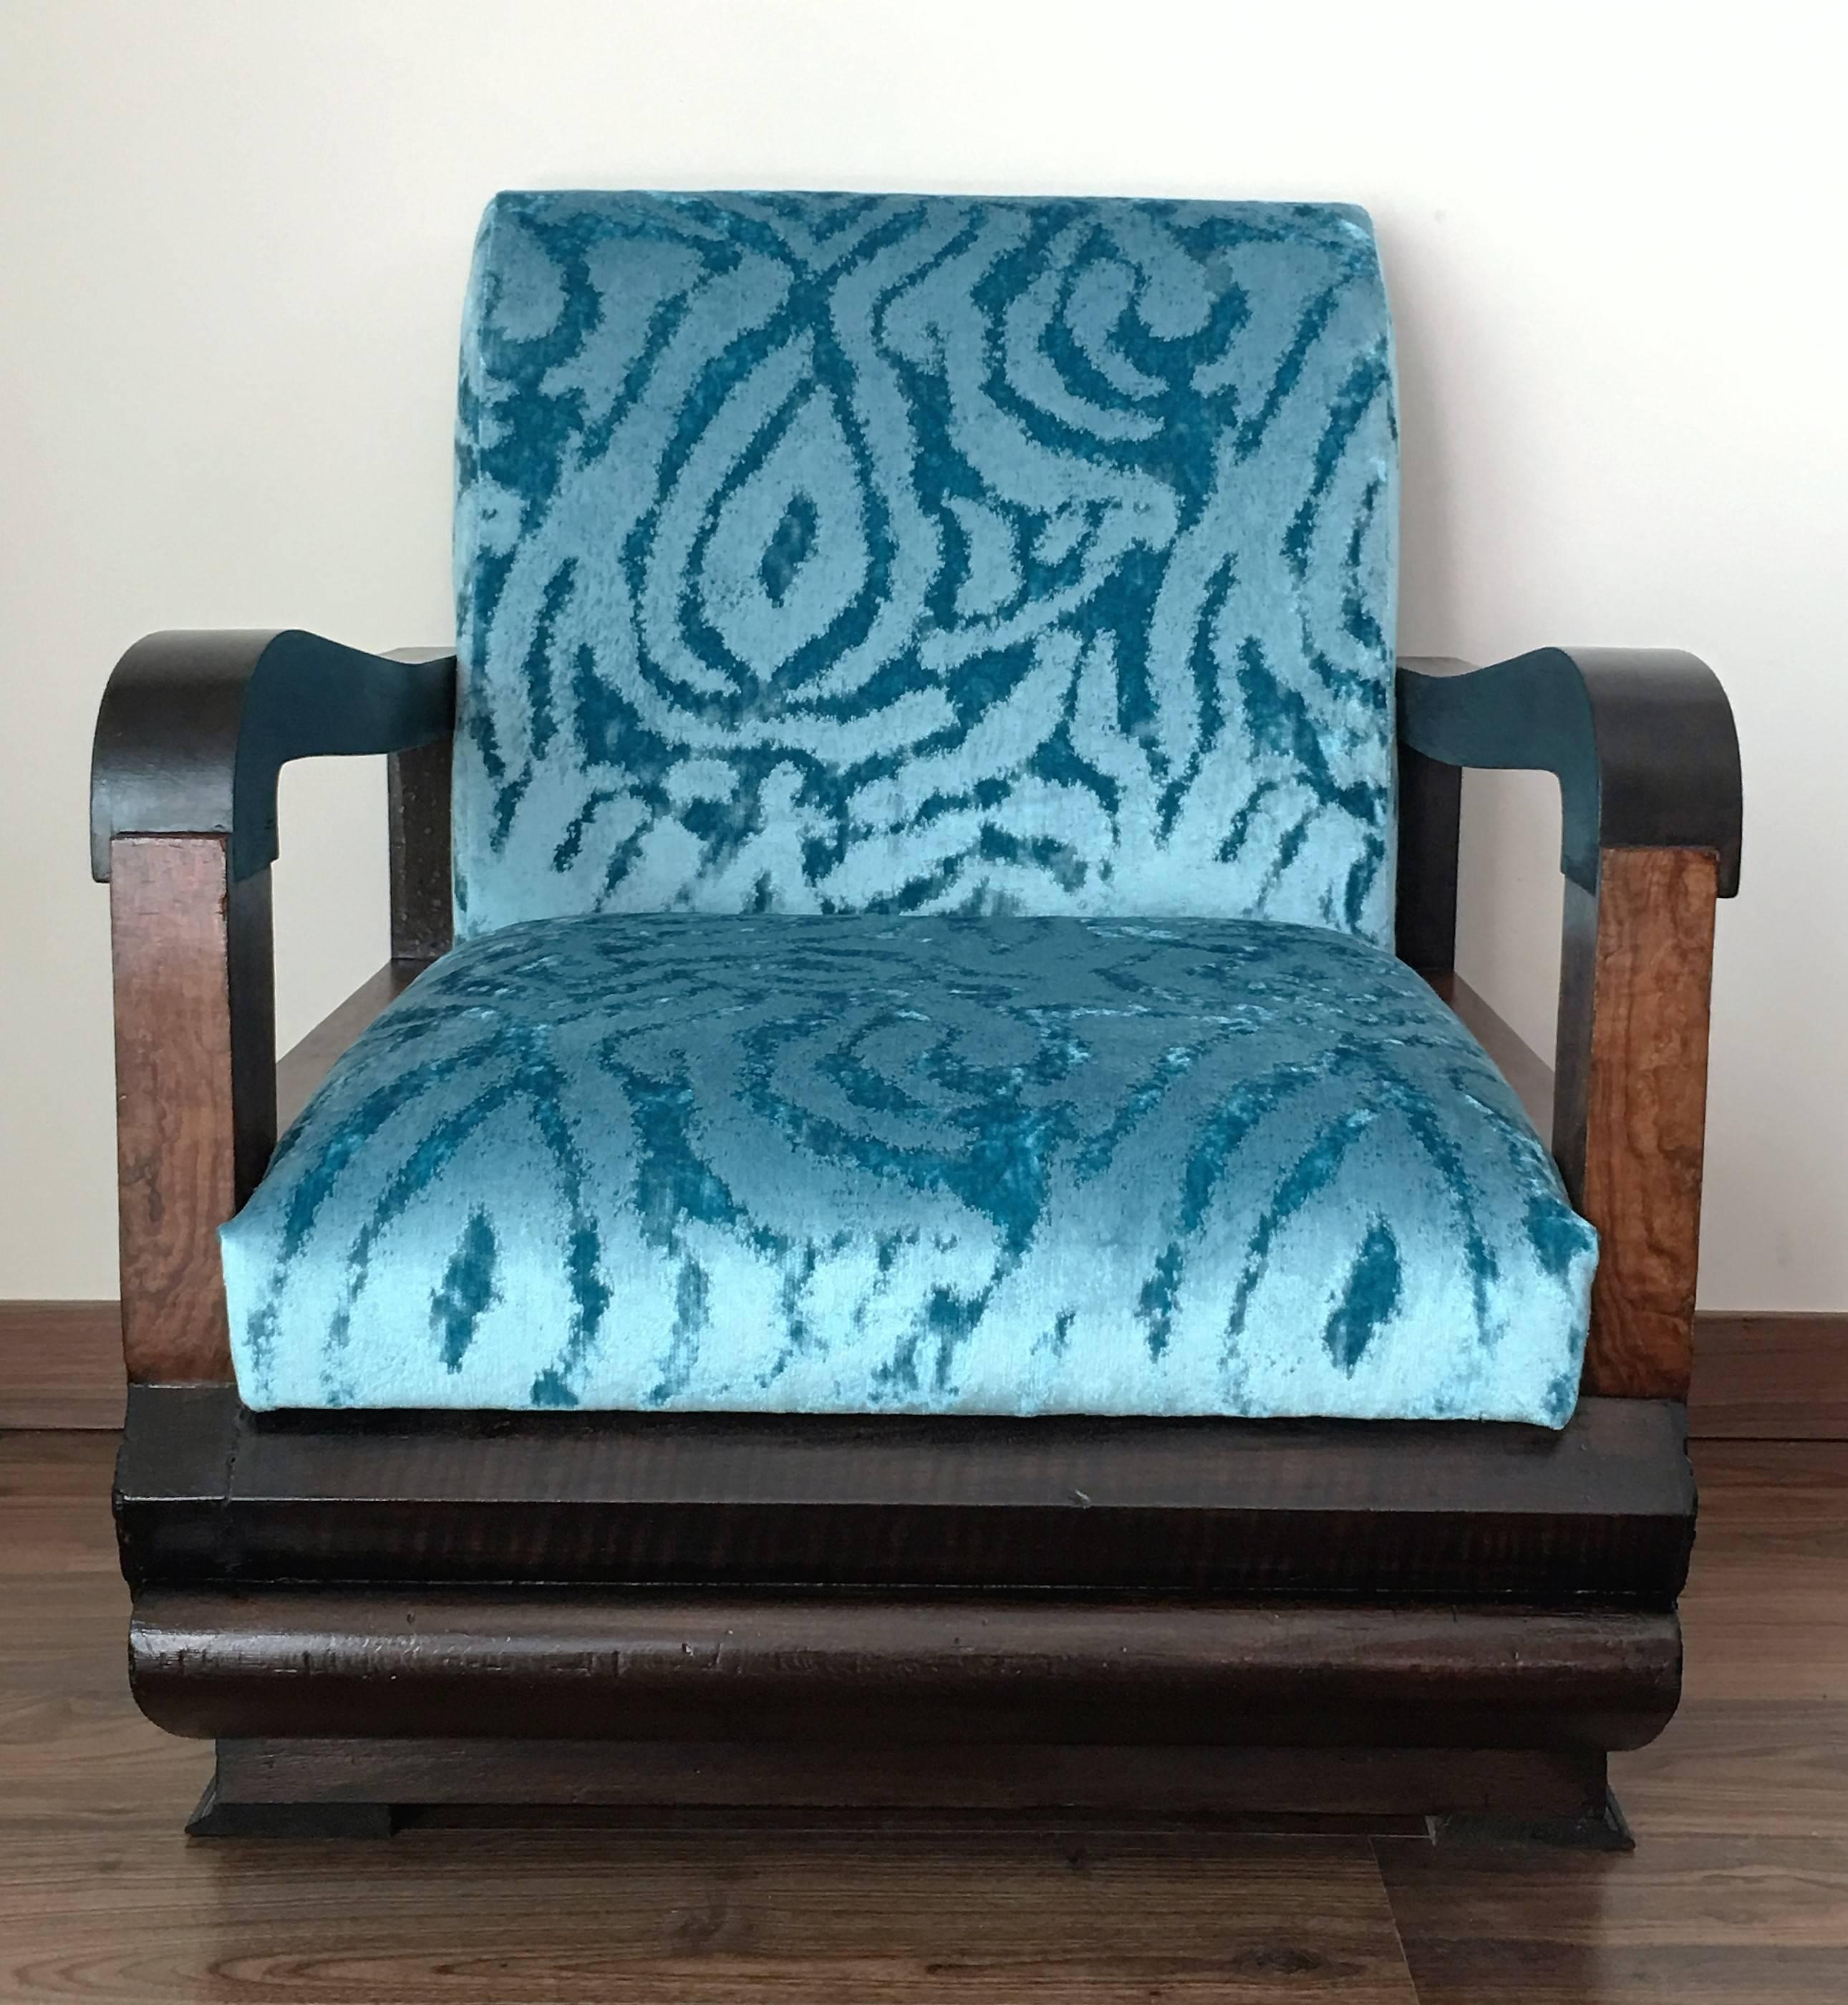 Pair of Art Deco Club Chair with Turqueoise Velvet by Lizzo, Italy 2